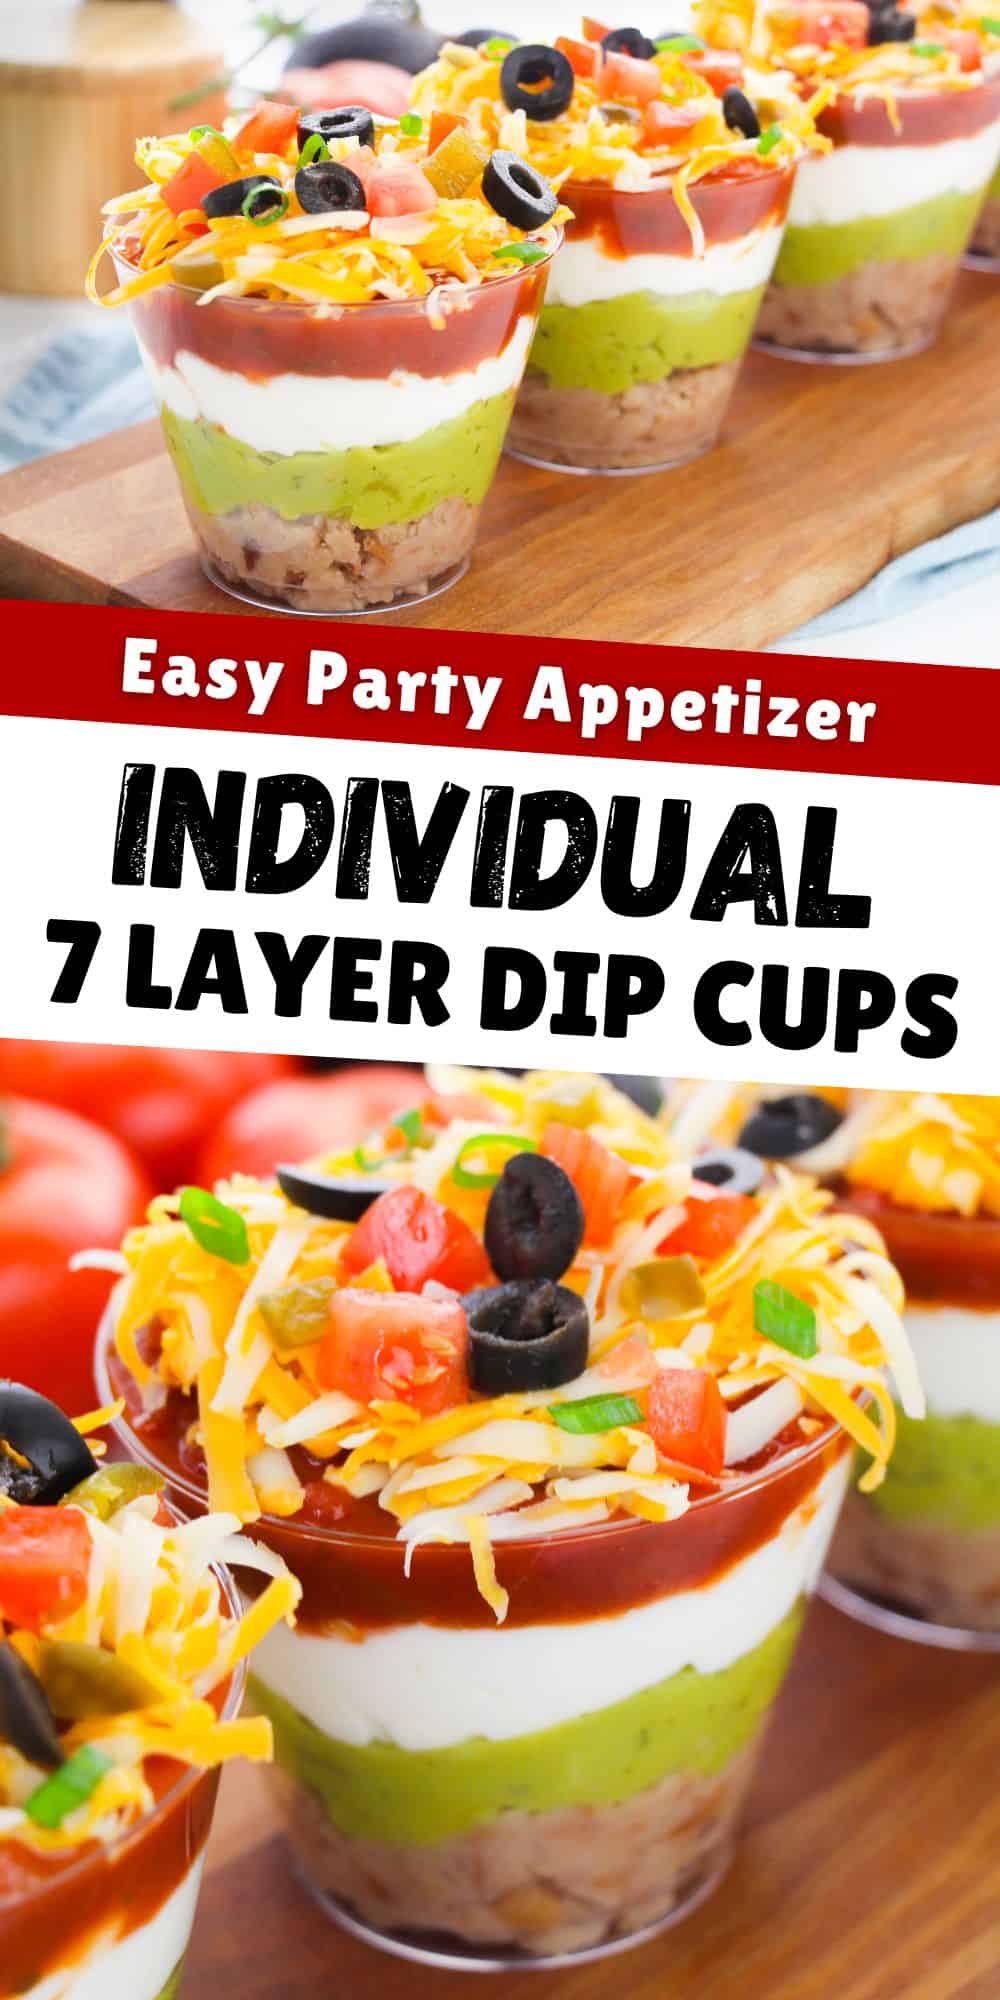 Individual 7 layer dip cups: Easy party appetizer.